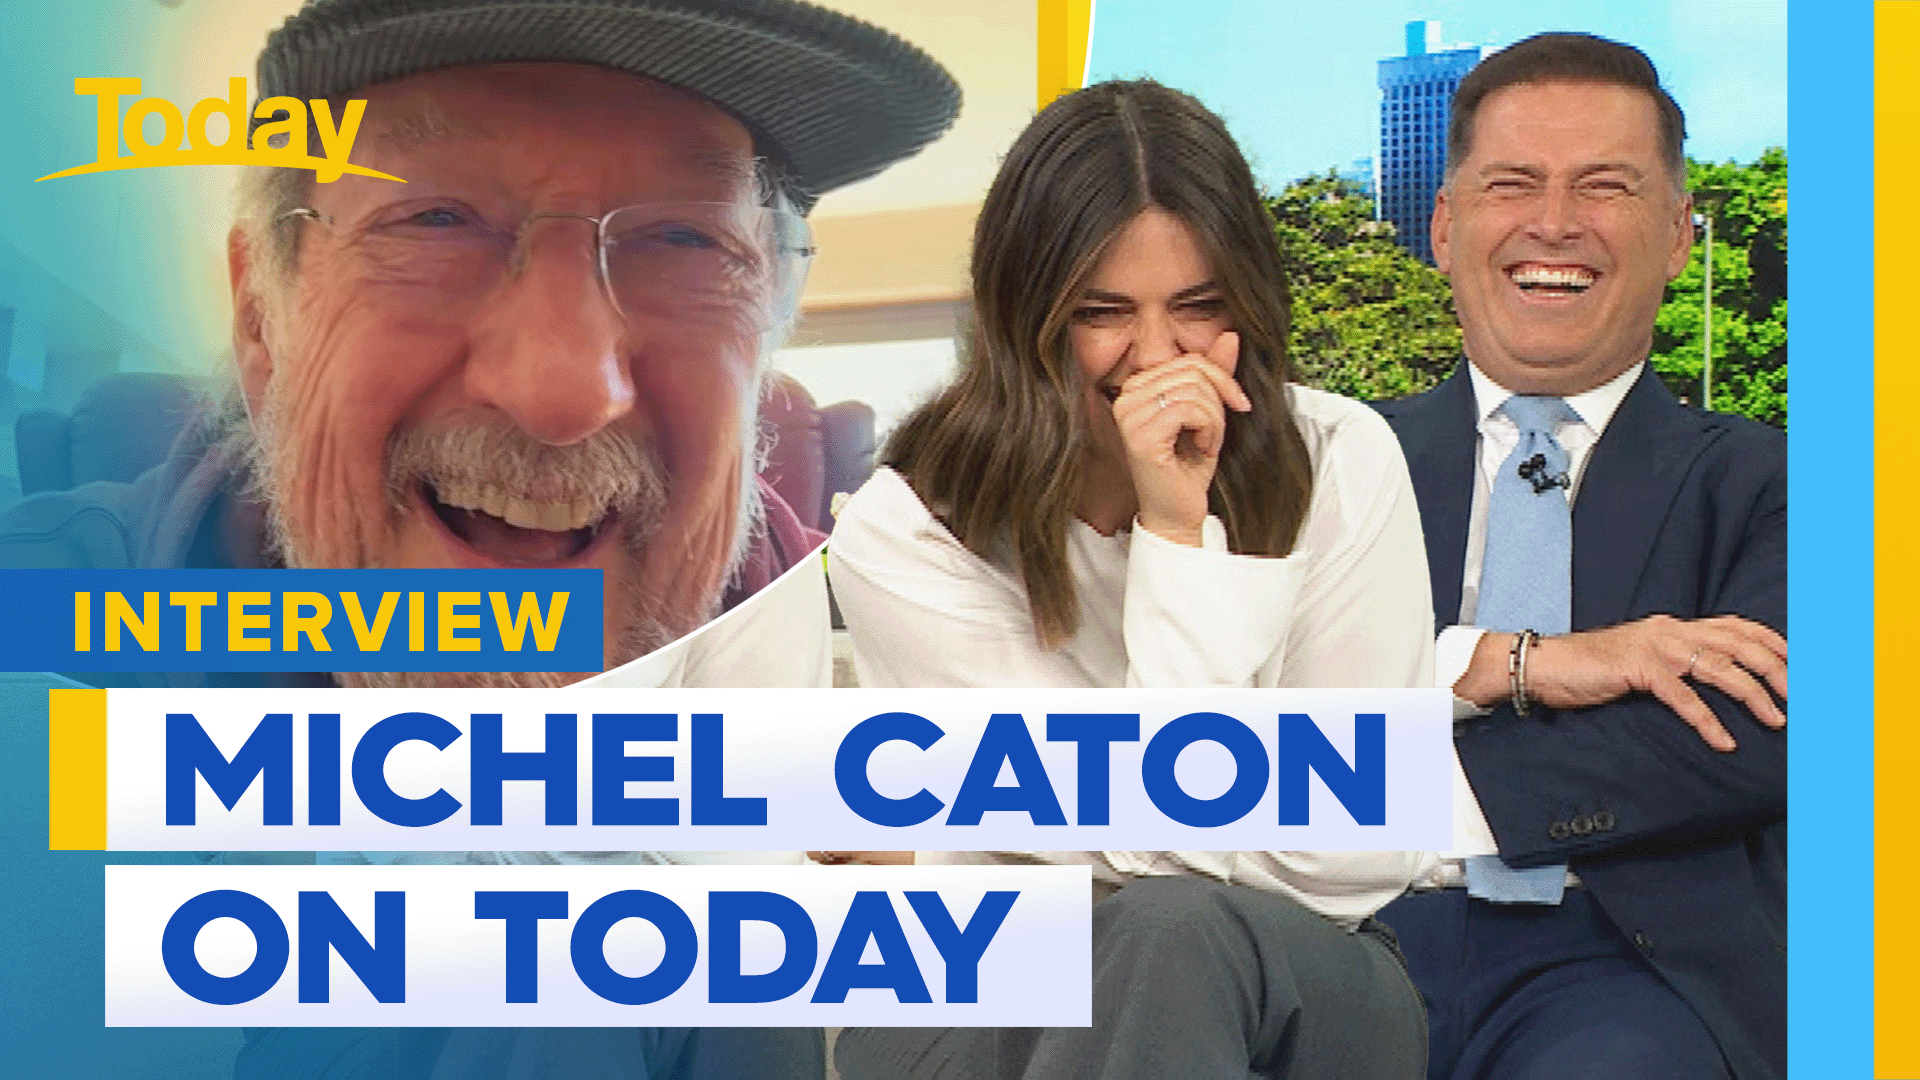 Michael Caton catches up with Today